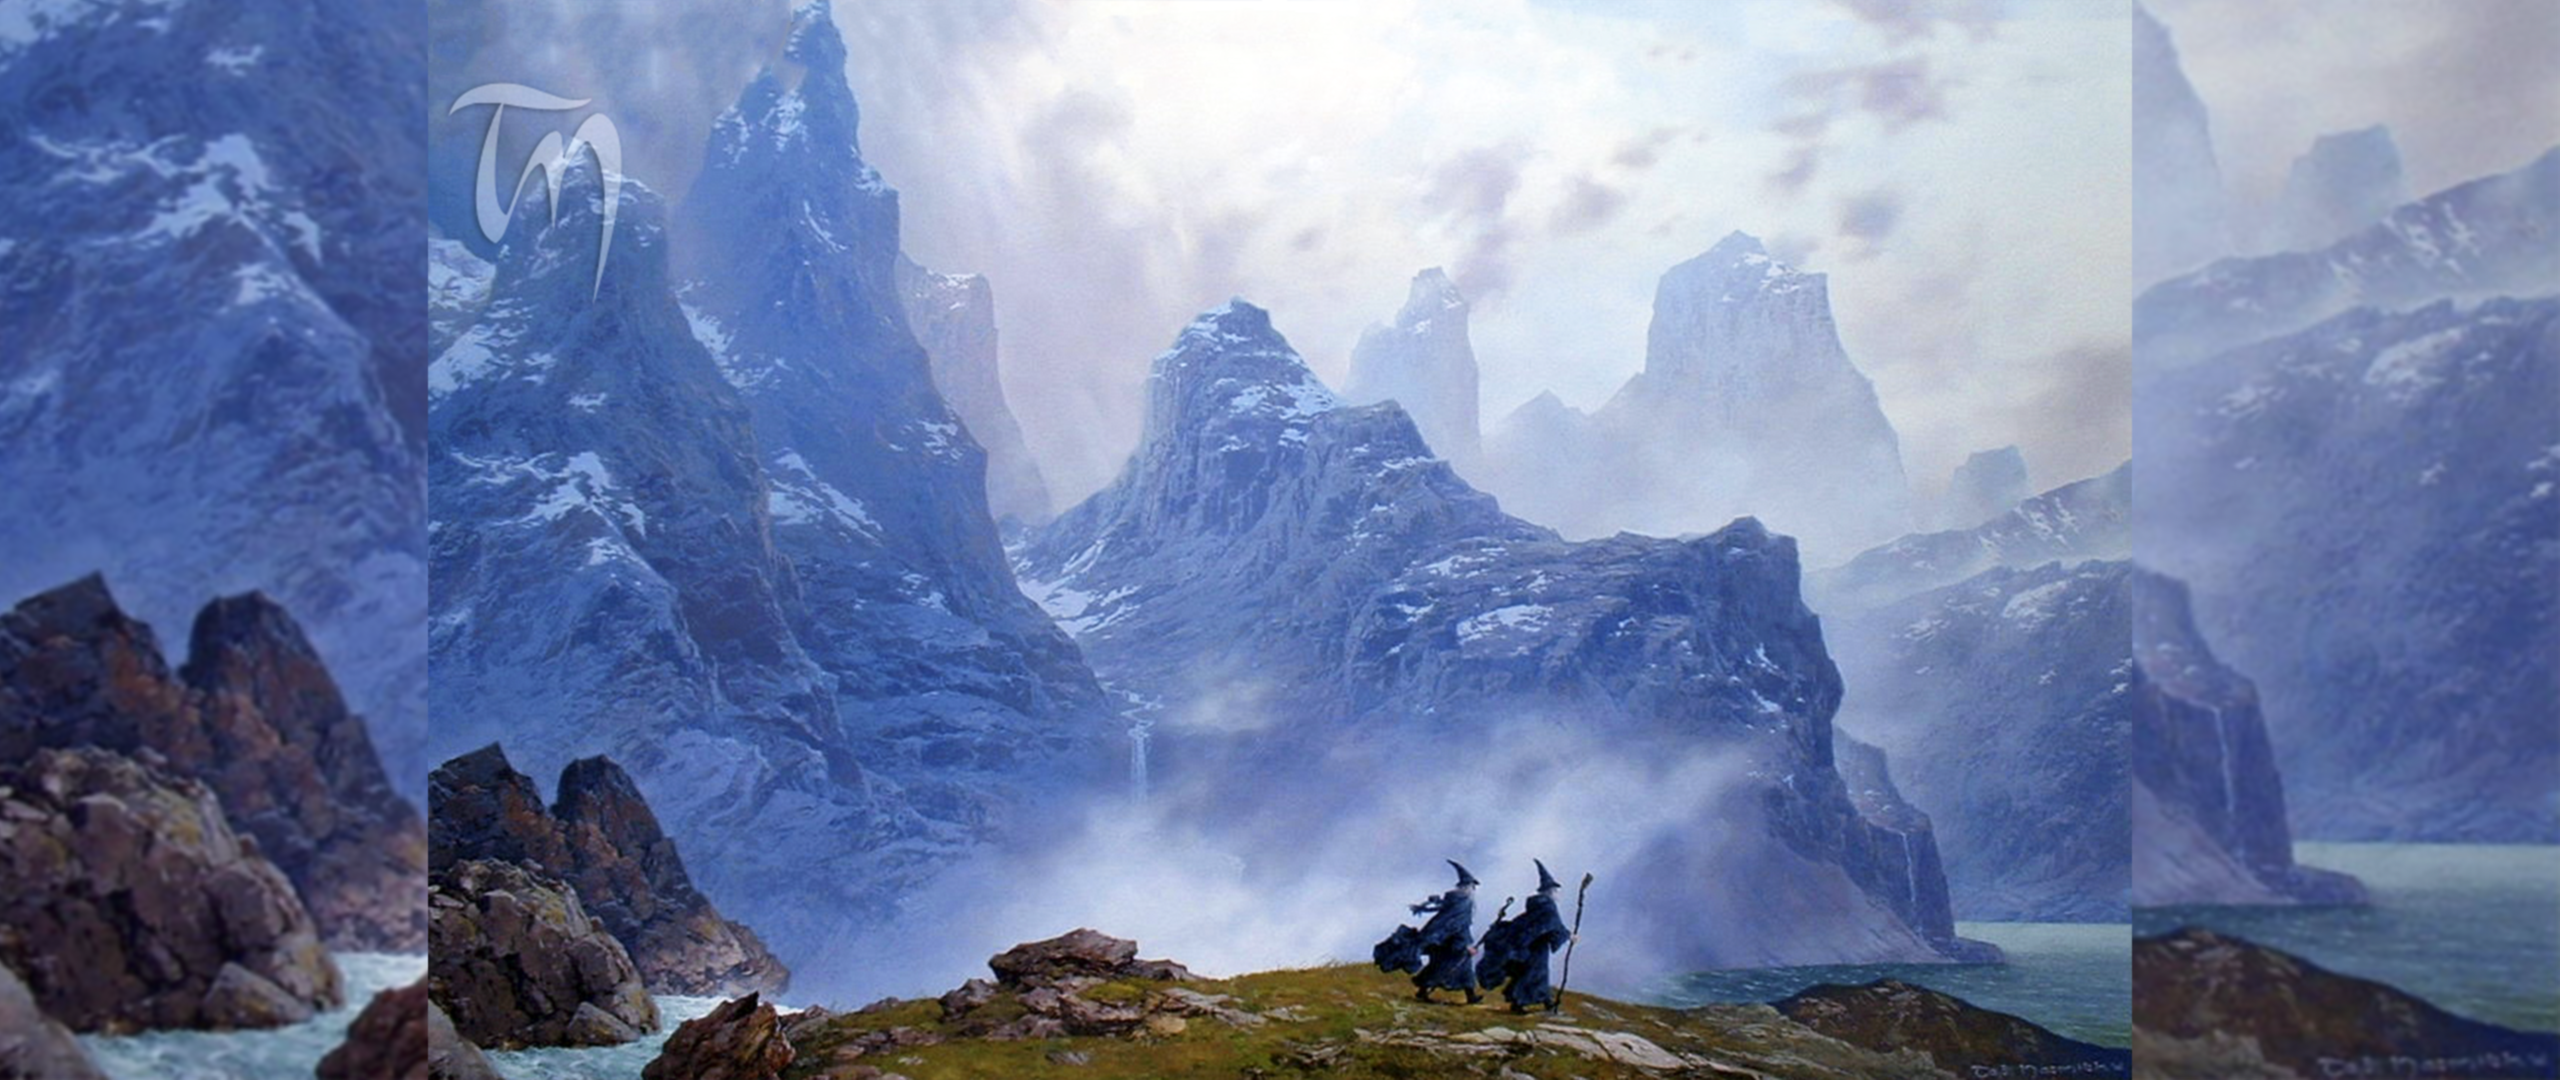 Blue Wizard Blue Wizards J R R Tolkien Middle Earth The Lord Of The Rings The Hobbit Hobbits Istari 2560x1080